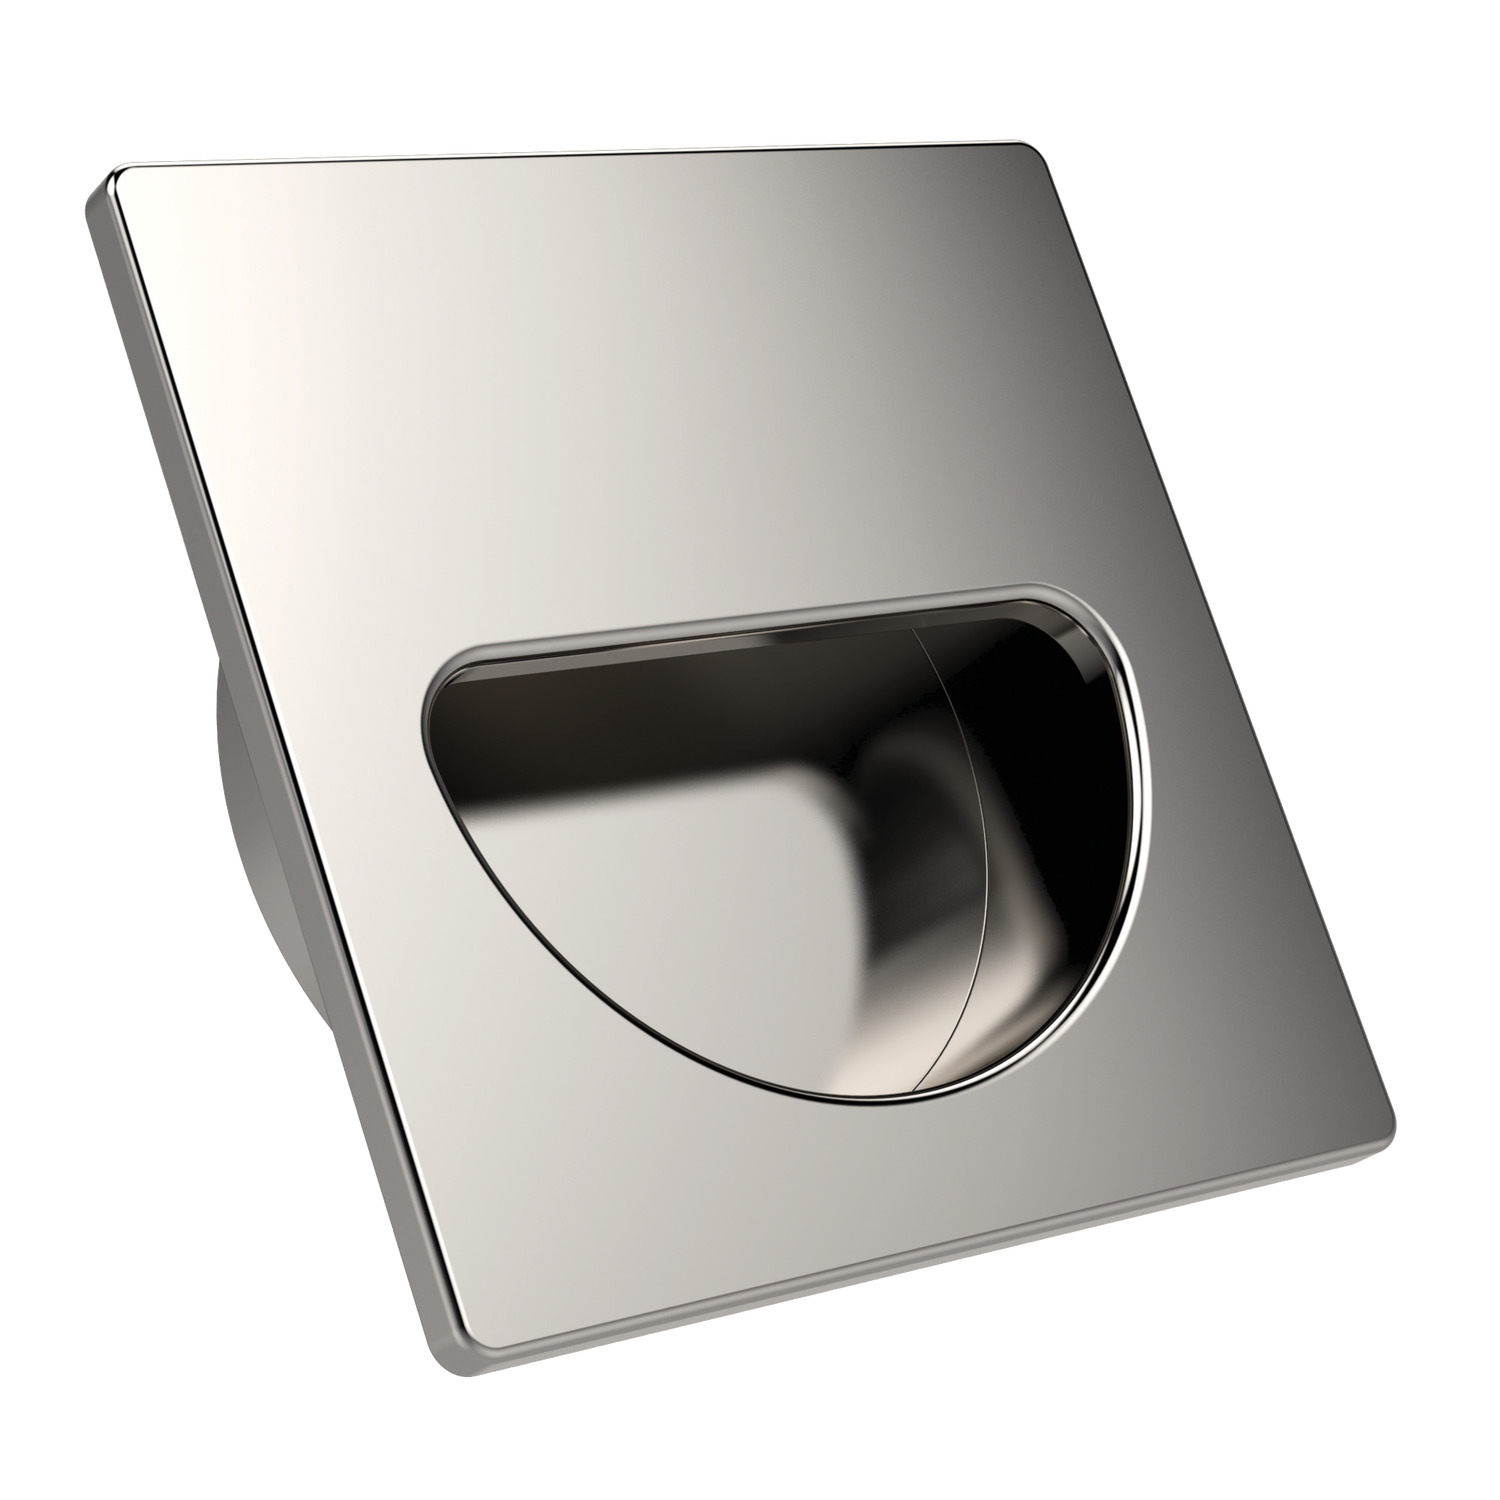 79510.W0038 Recessed Pull Handles, Stainless Steel Also known as U5380.AC0038